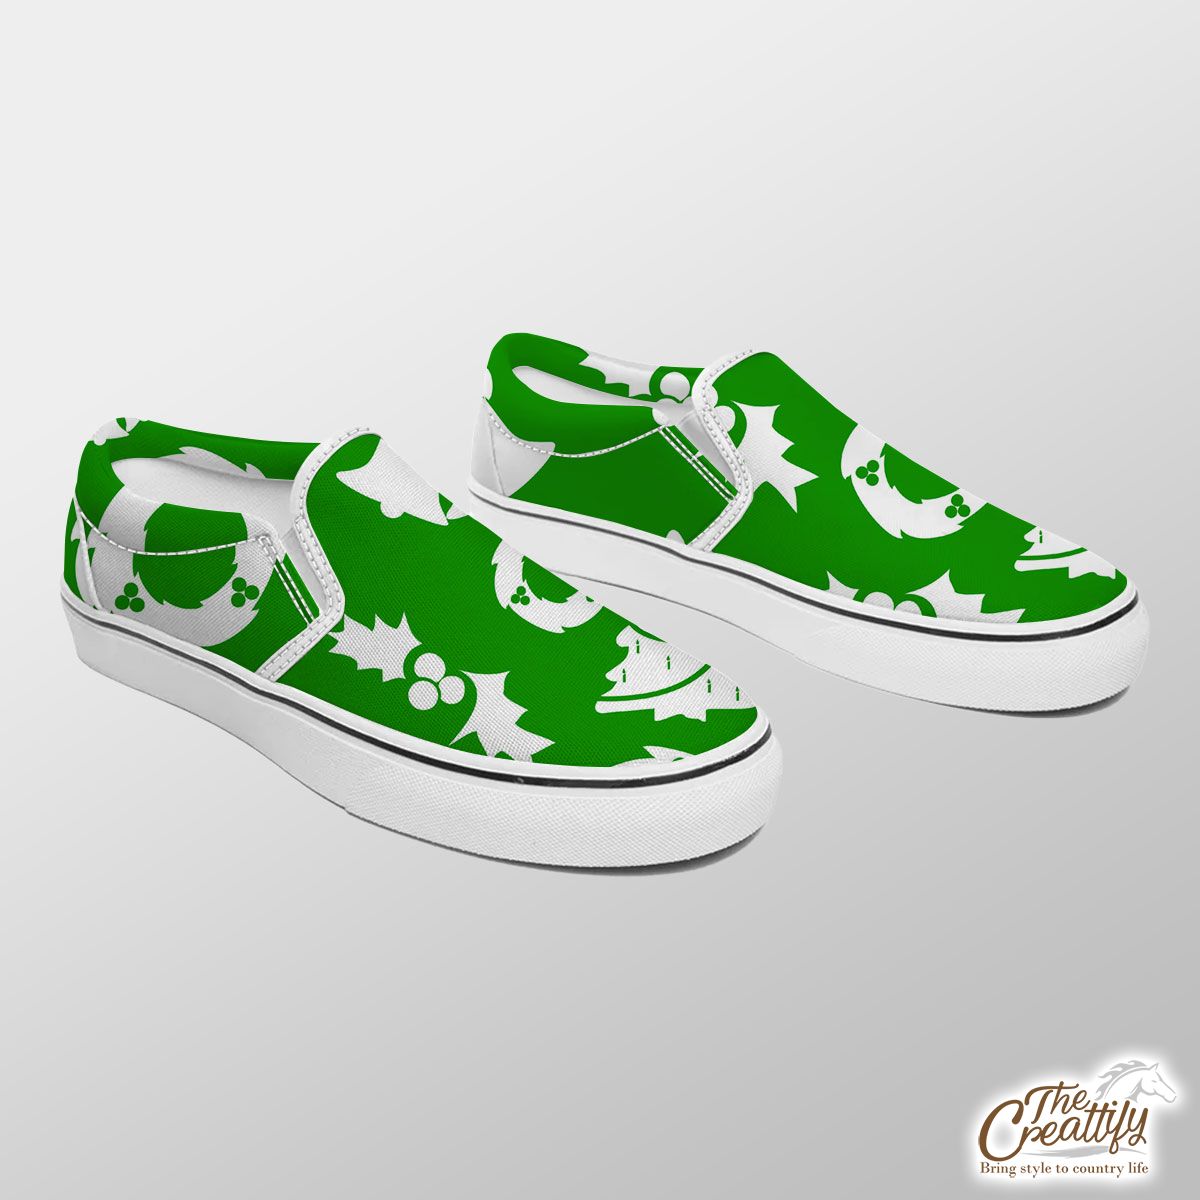 Christmas Wreath, Holly Leaf, Pine Tree And Bells On Green Slip On Sneakers